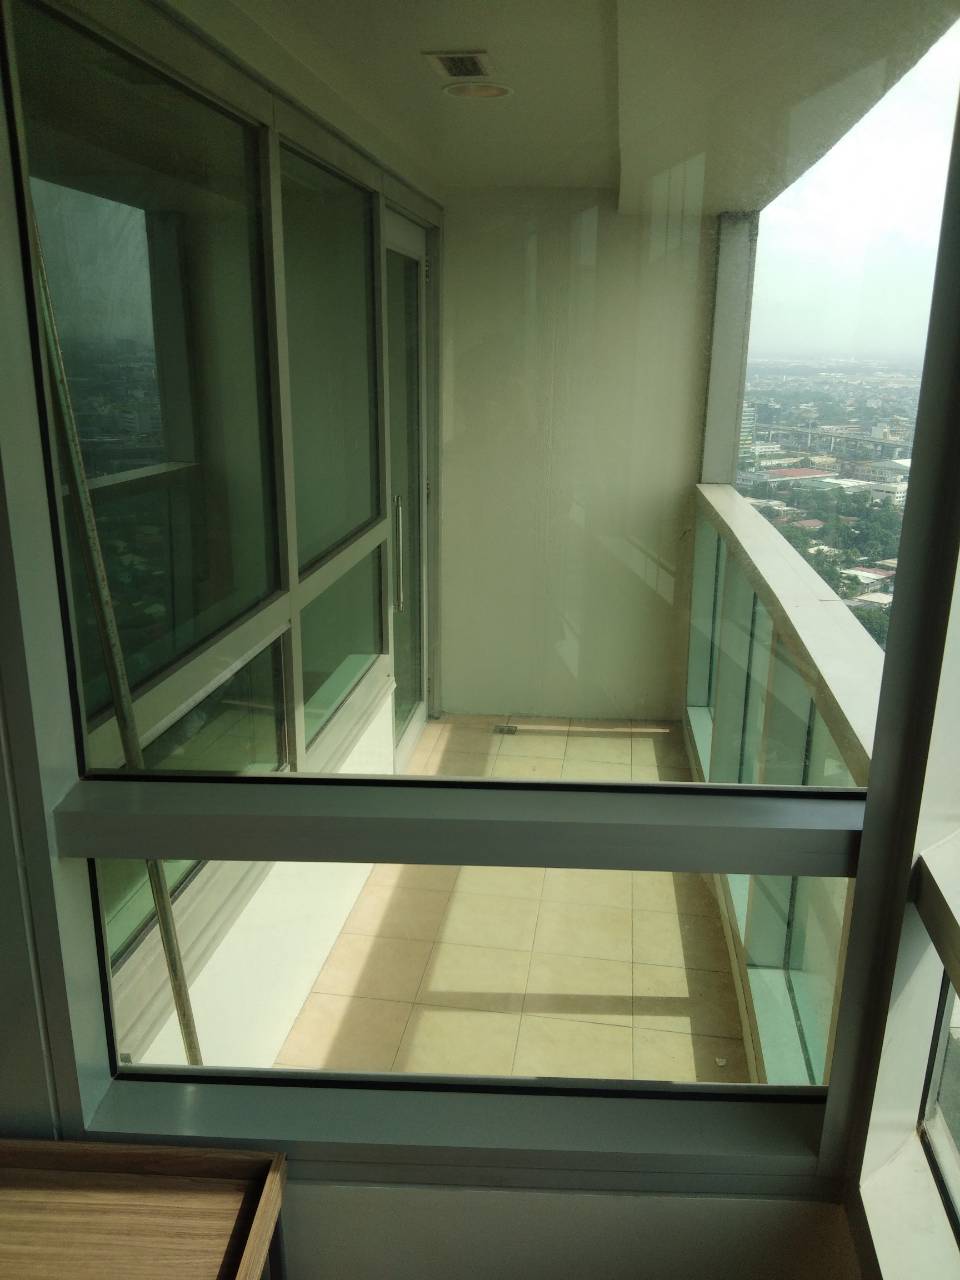 2 Bedrooms Condo For Rent, The Residences At Greenbelt Balcony 1